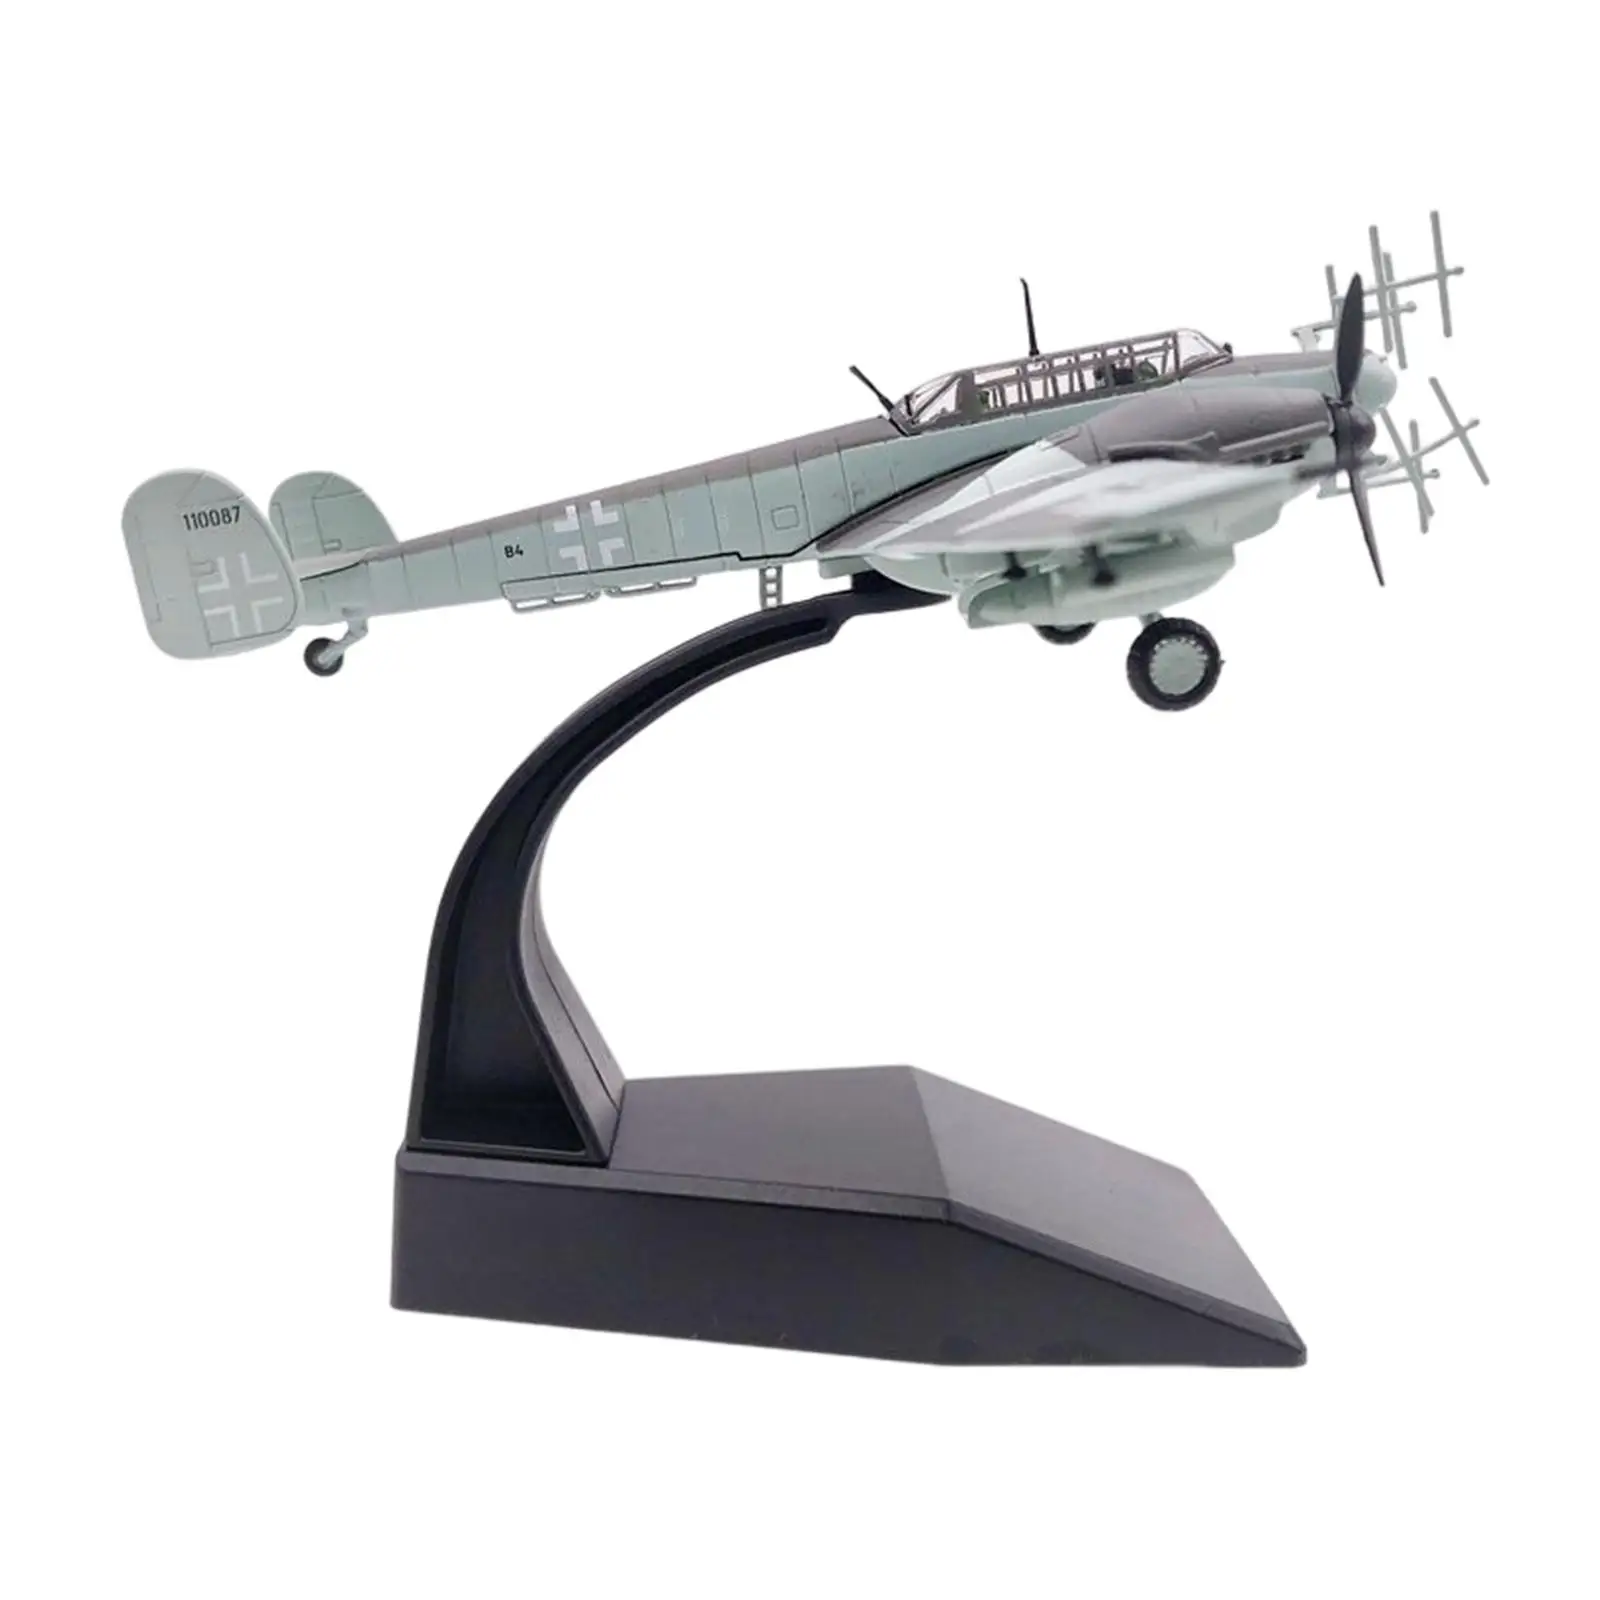 1/100 Scale BF-110 Fighter Model with Stand Living Room Decorations Gift